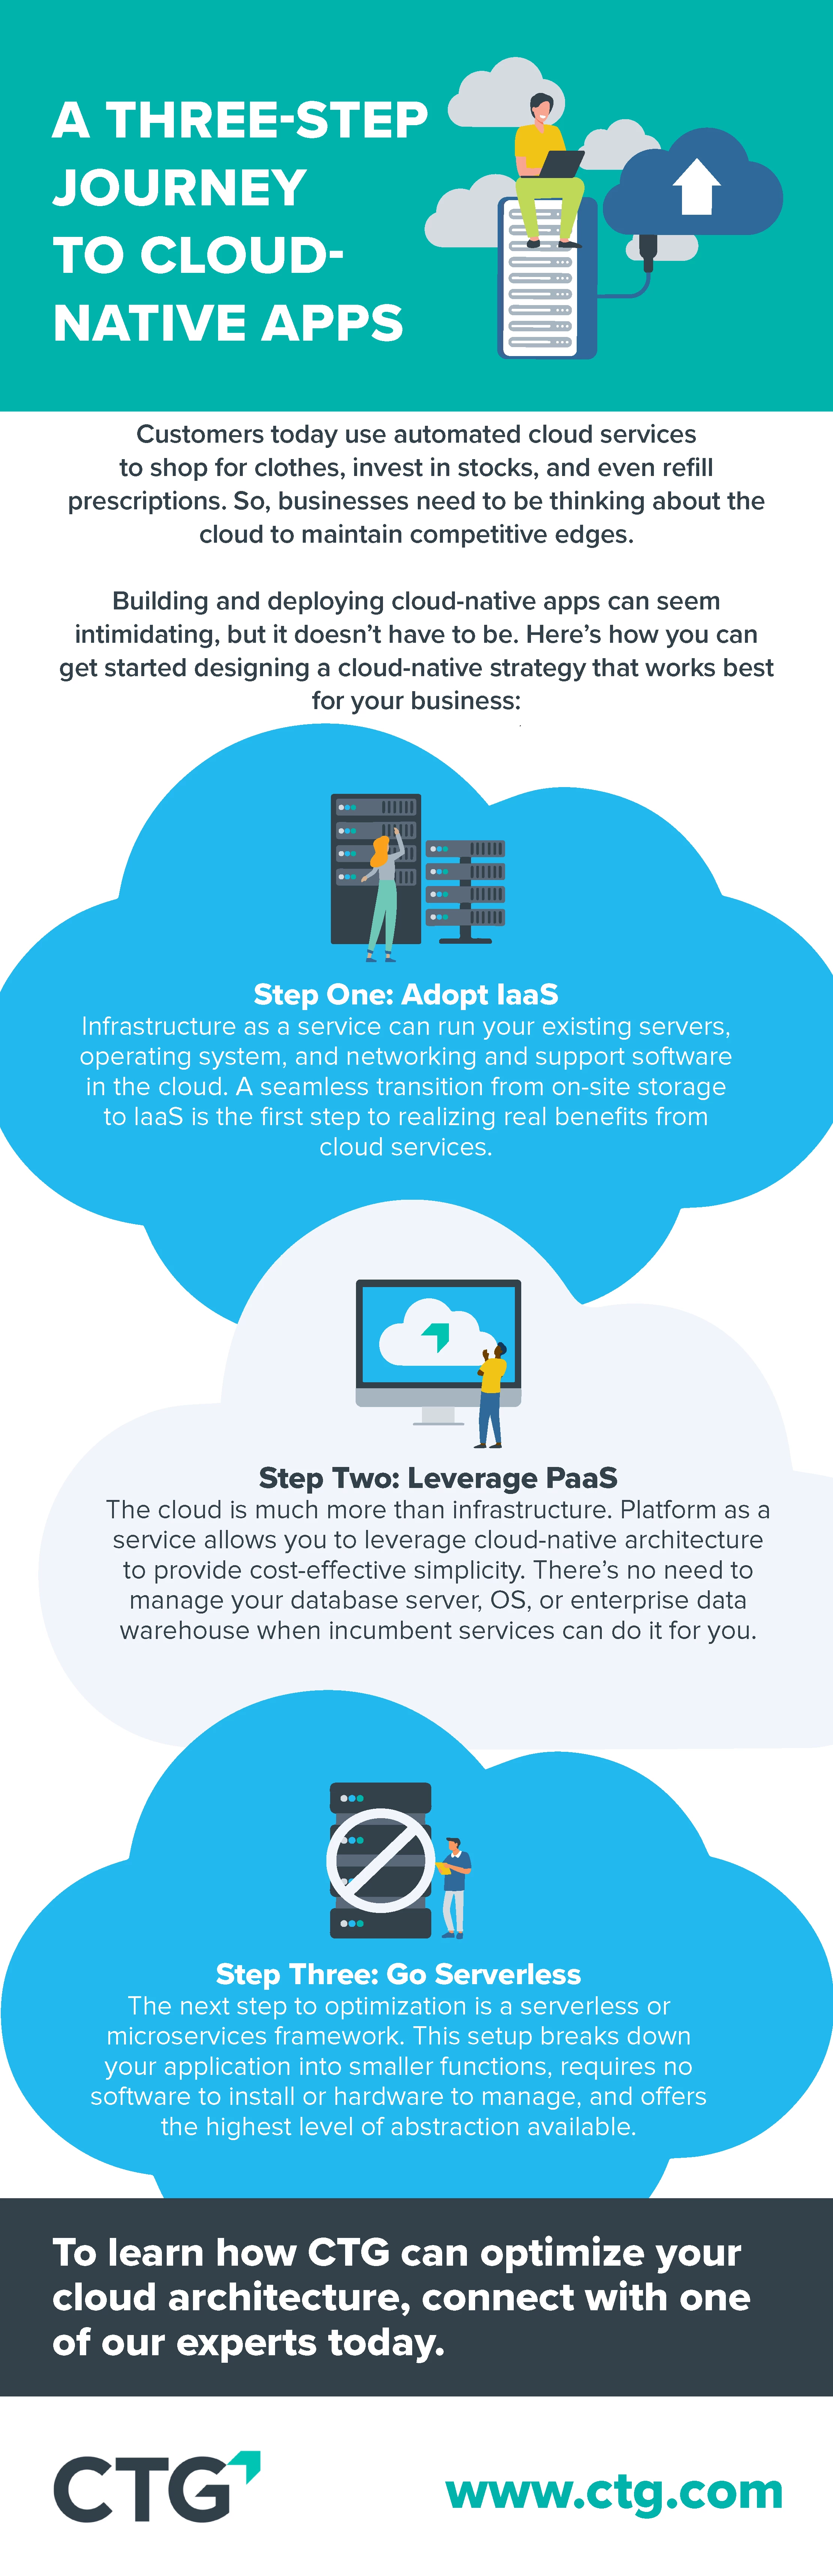 A Three-Step Journey to Cloud-Native Apps